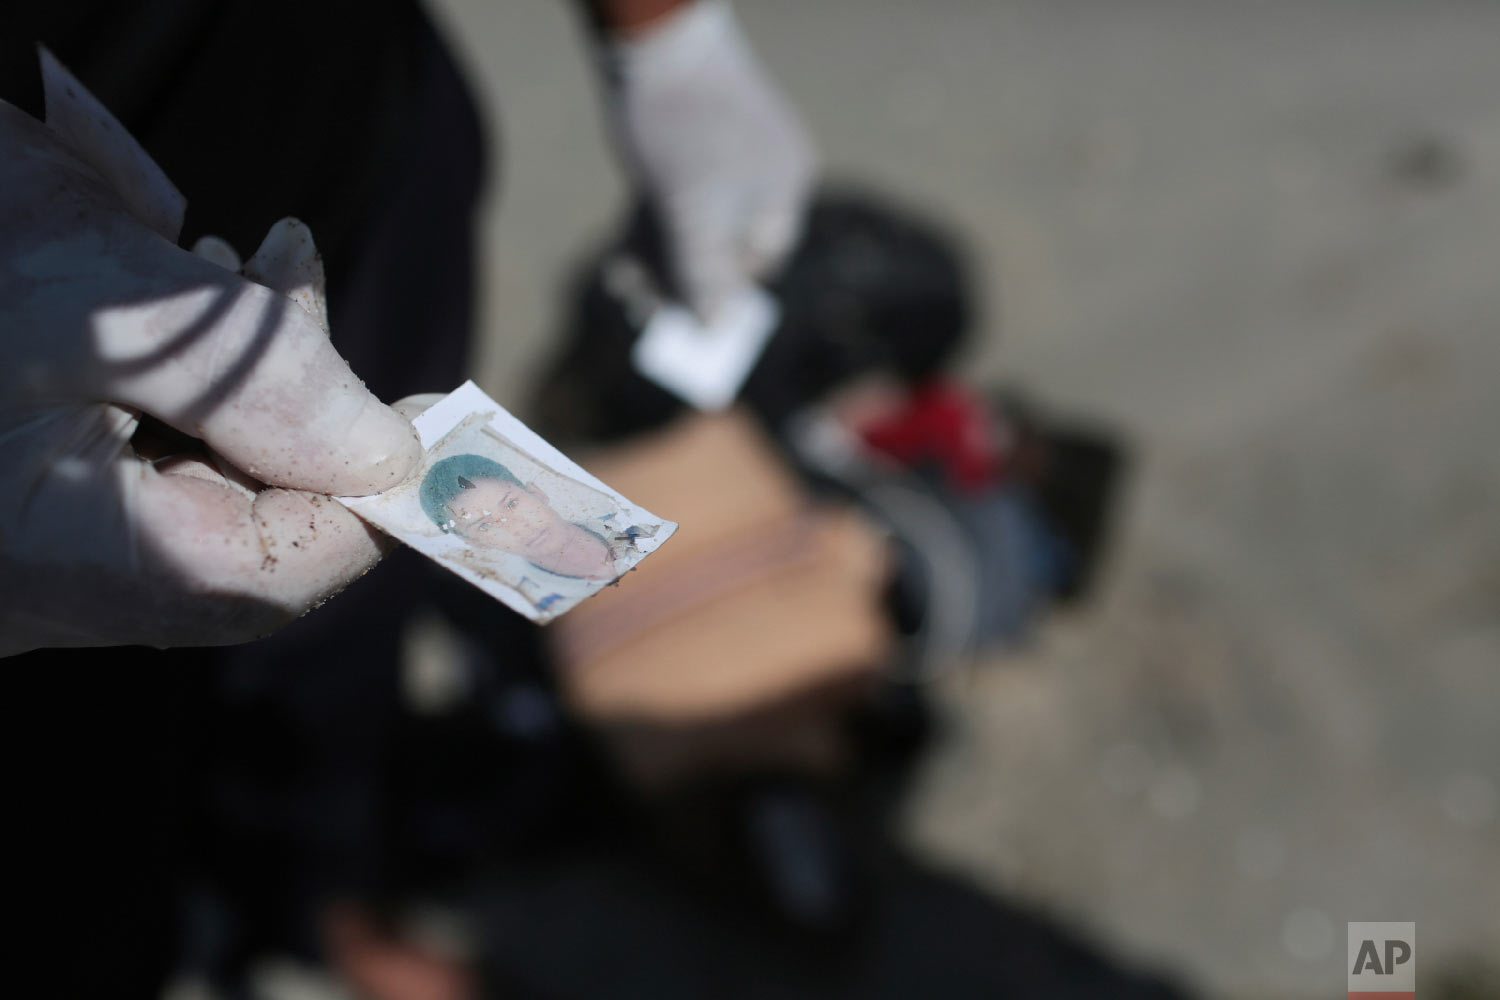  A Libyan Red Crescent worker holds a picture that was found in a bag of belongings that washed up on a beach near the Tunisian Libyan border, not far from Zuwarah, 102 km (63 mi) west of Tripoli, Libya, Saturday, Sept. 12, 2015.  (AP Photo/Mohamed B